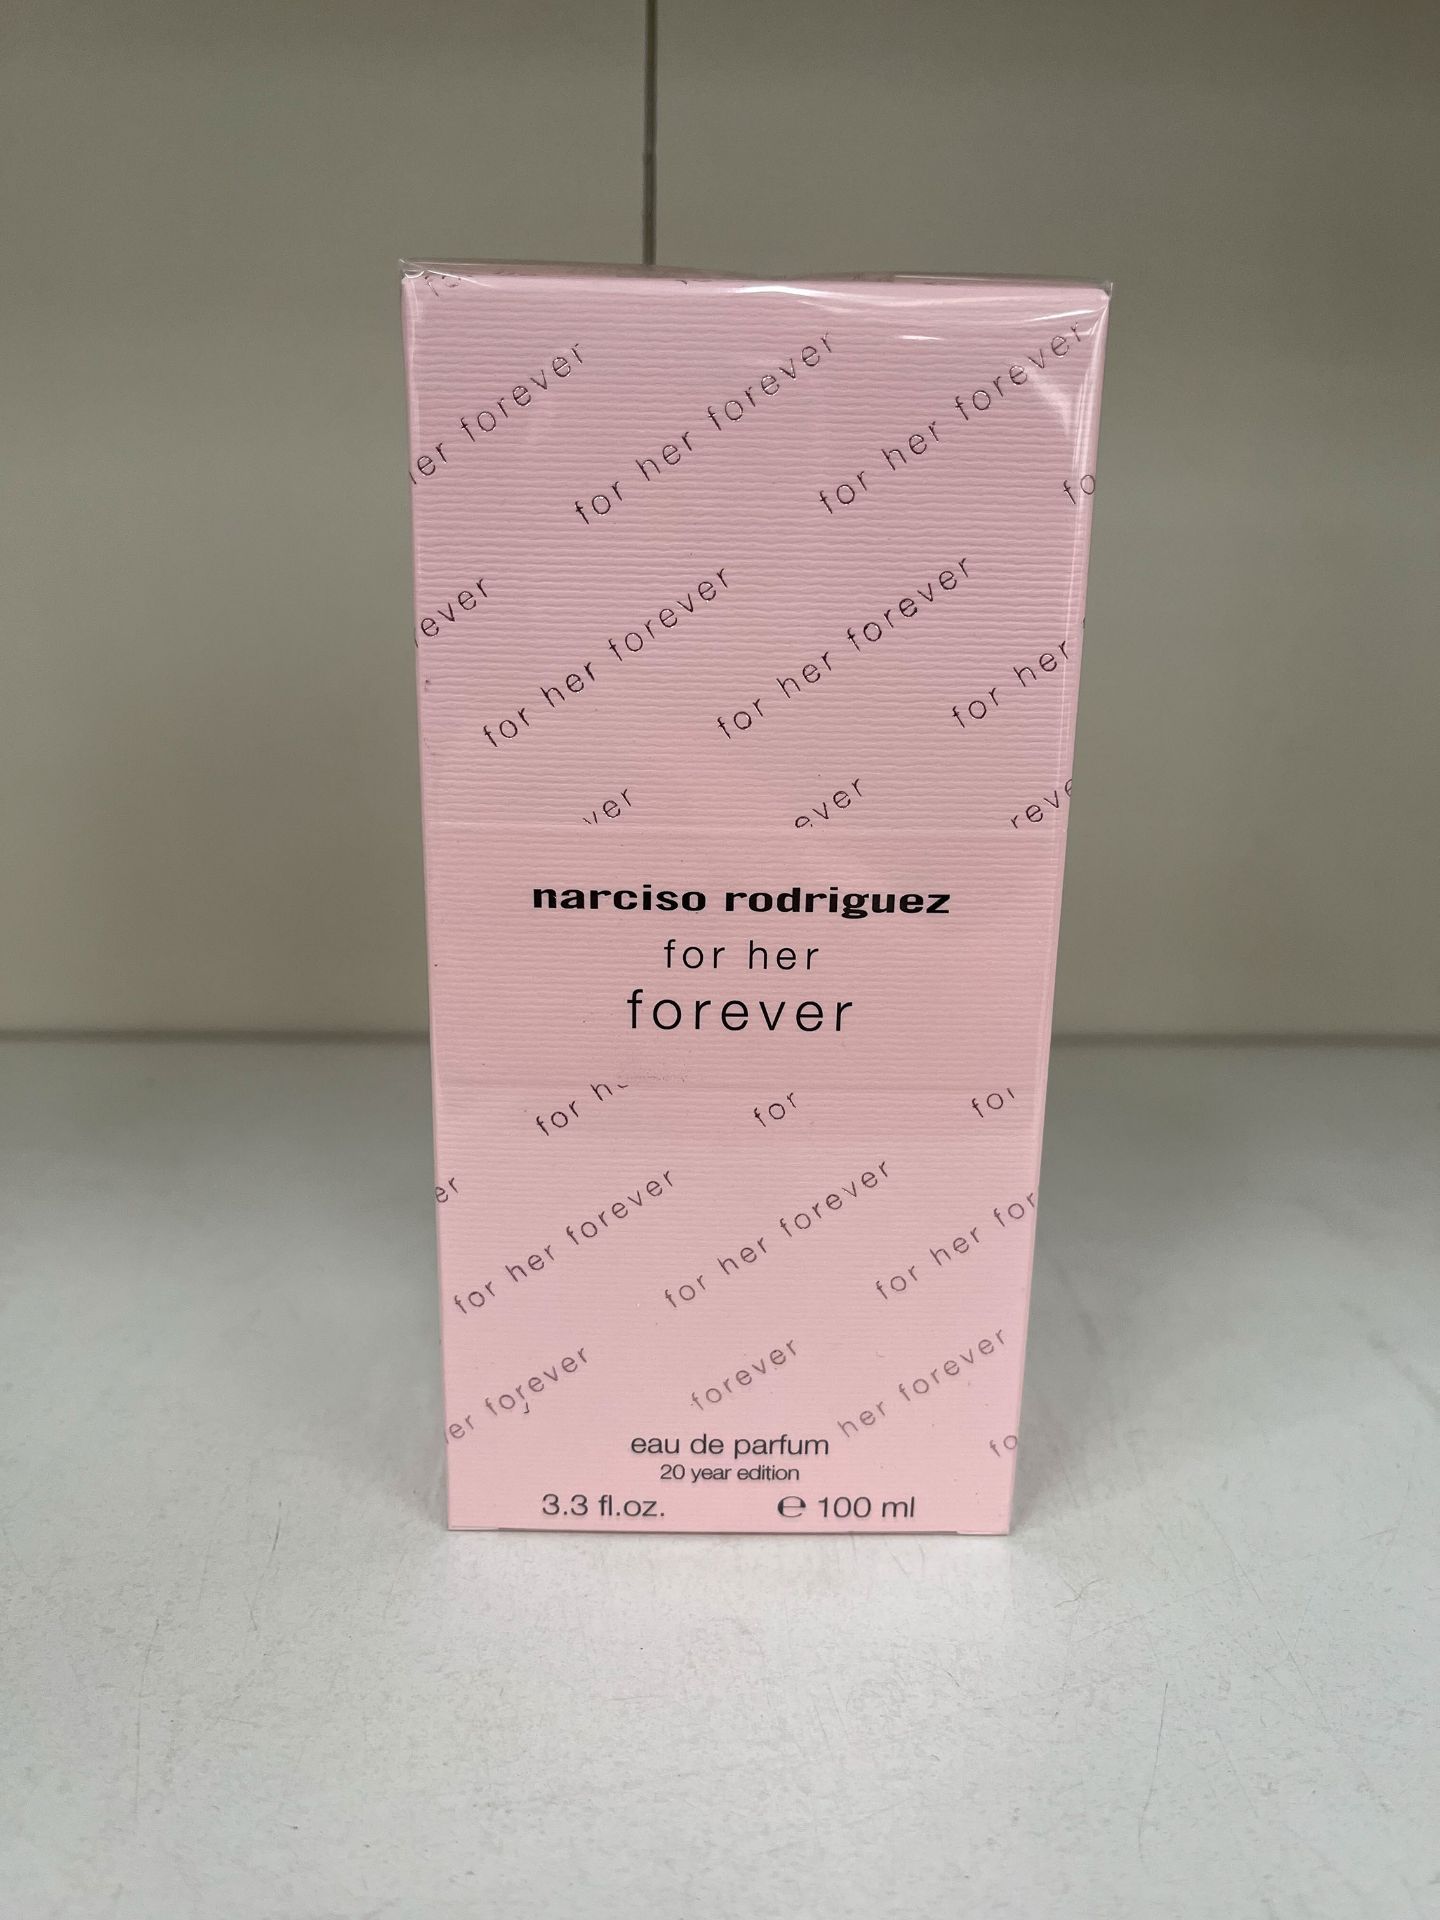 1x 100ml Narciso Rodriguez For Her Forever 20year Edition